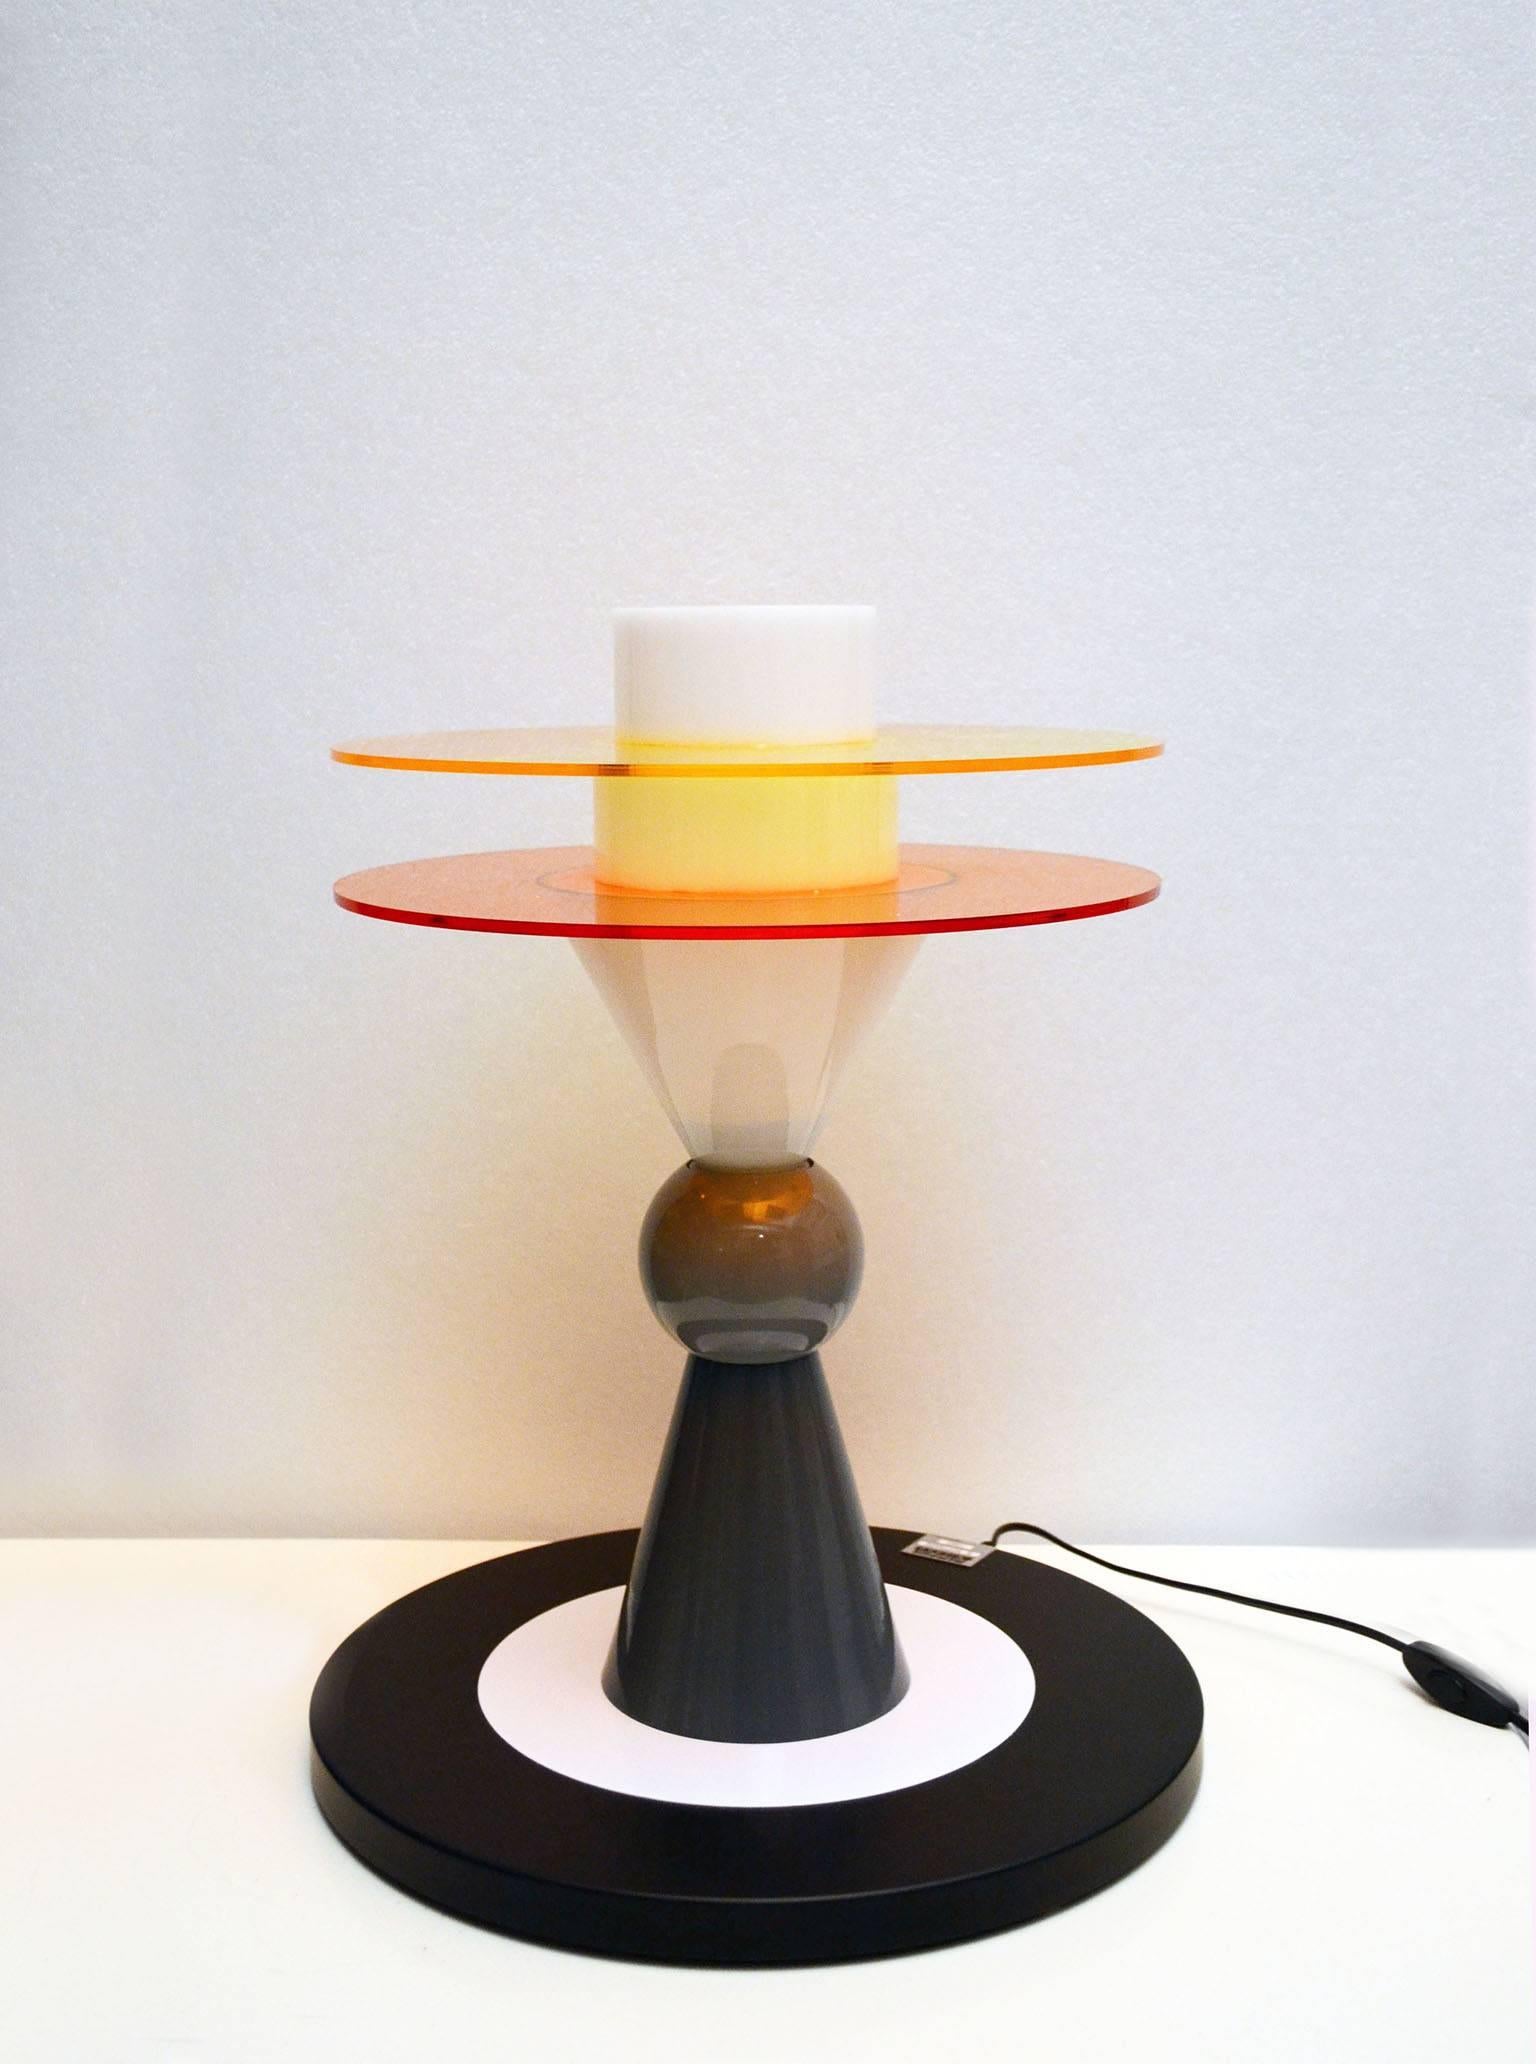 Ettore Sottsass 'Bay' table lamp for Memphis Milano, 1983.
In painted metal, glass and plexiglass.